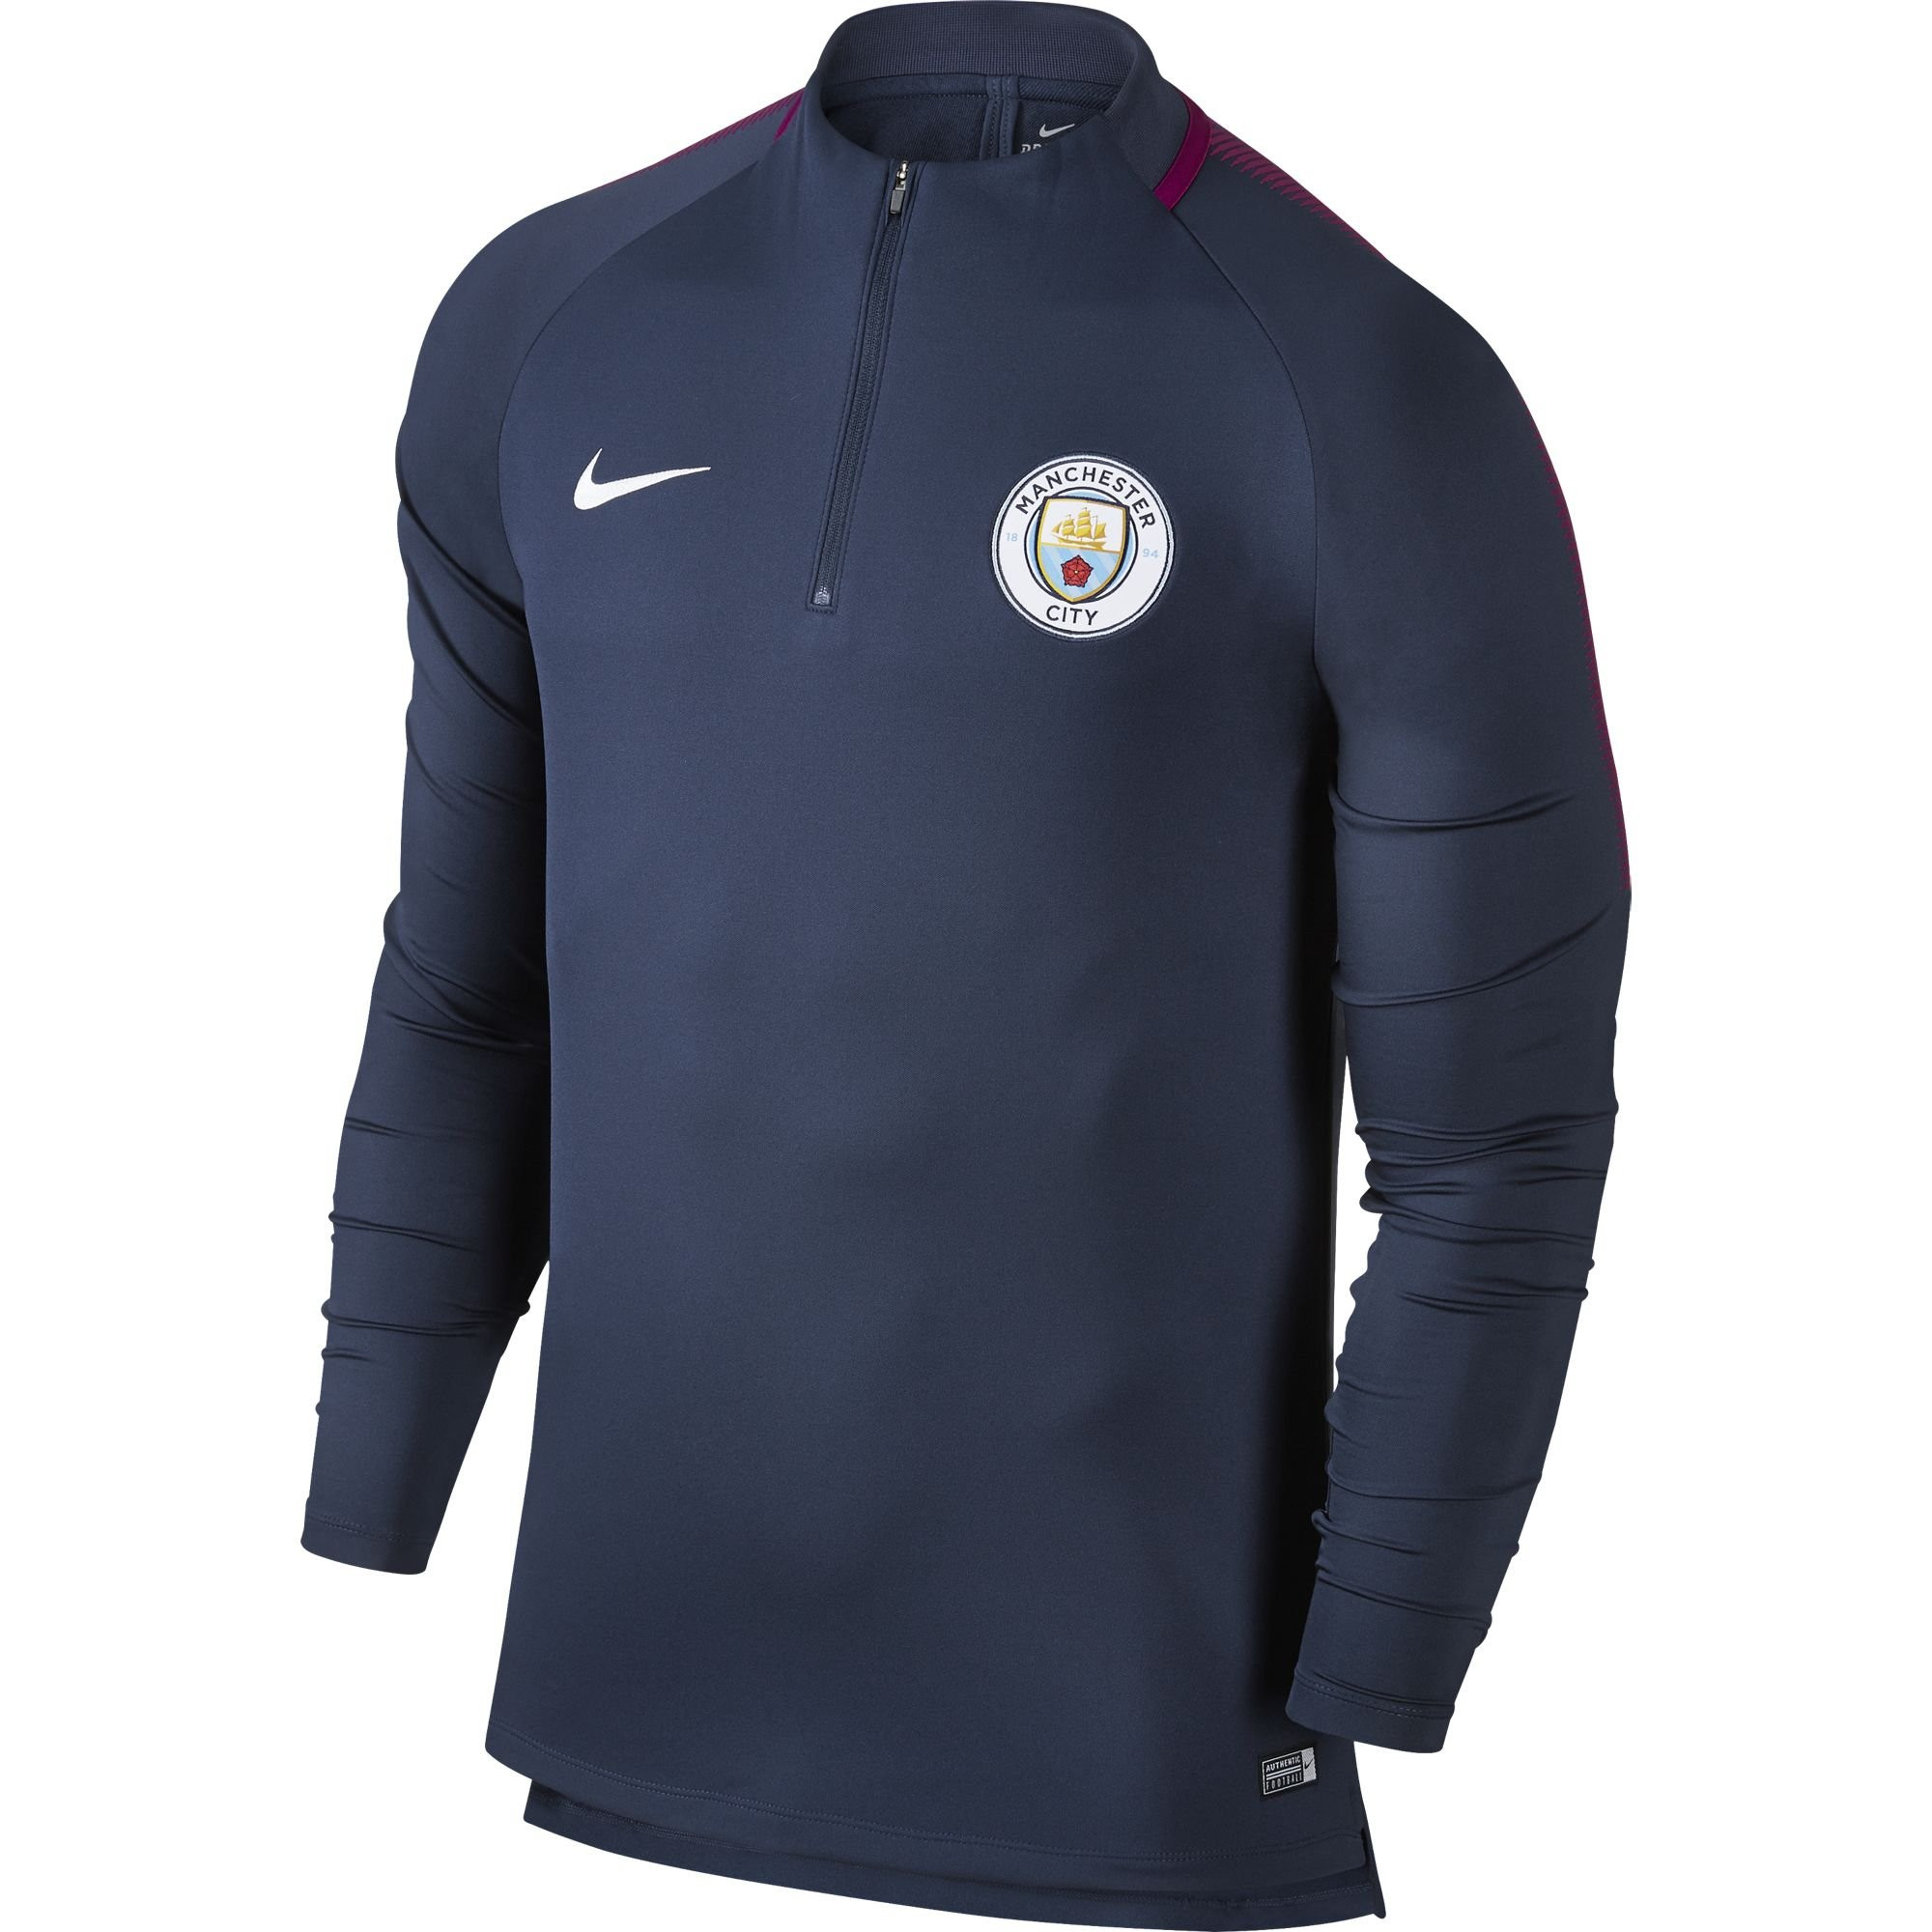 NIKE MANCHESTER CITY TRG TOP MARINE 2017/2018